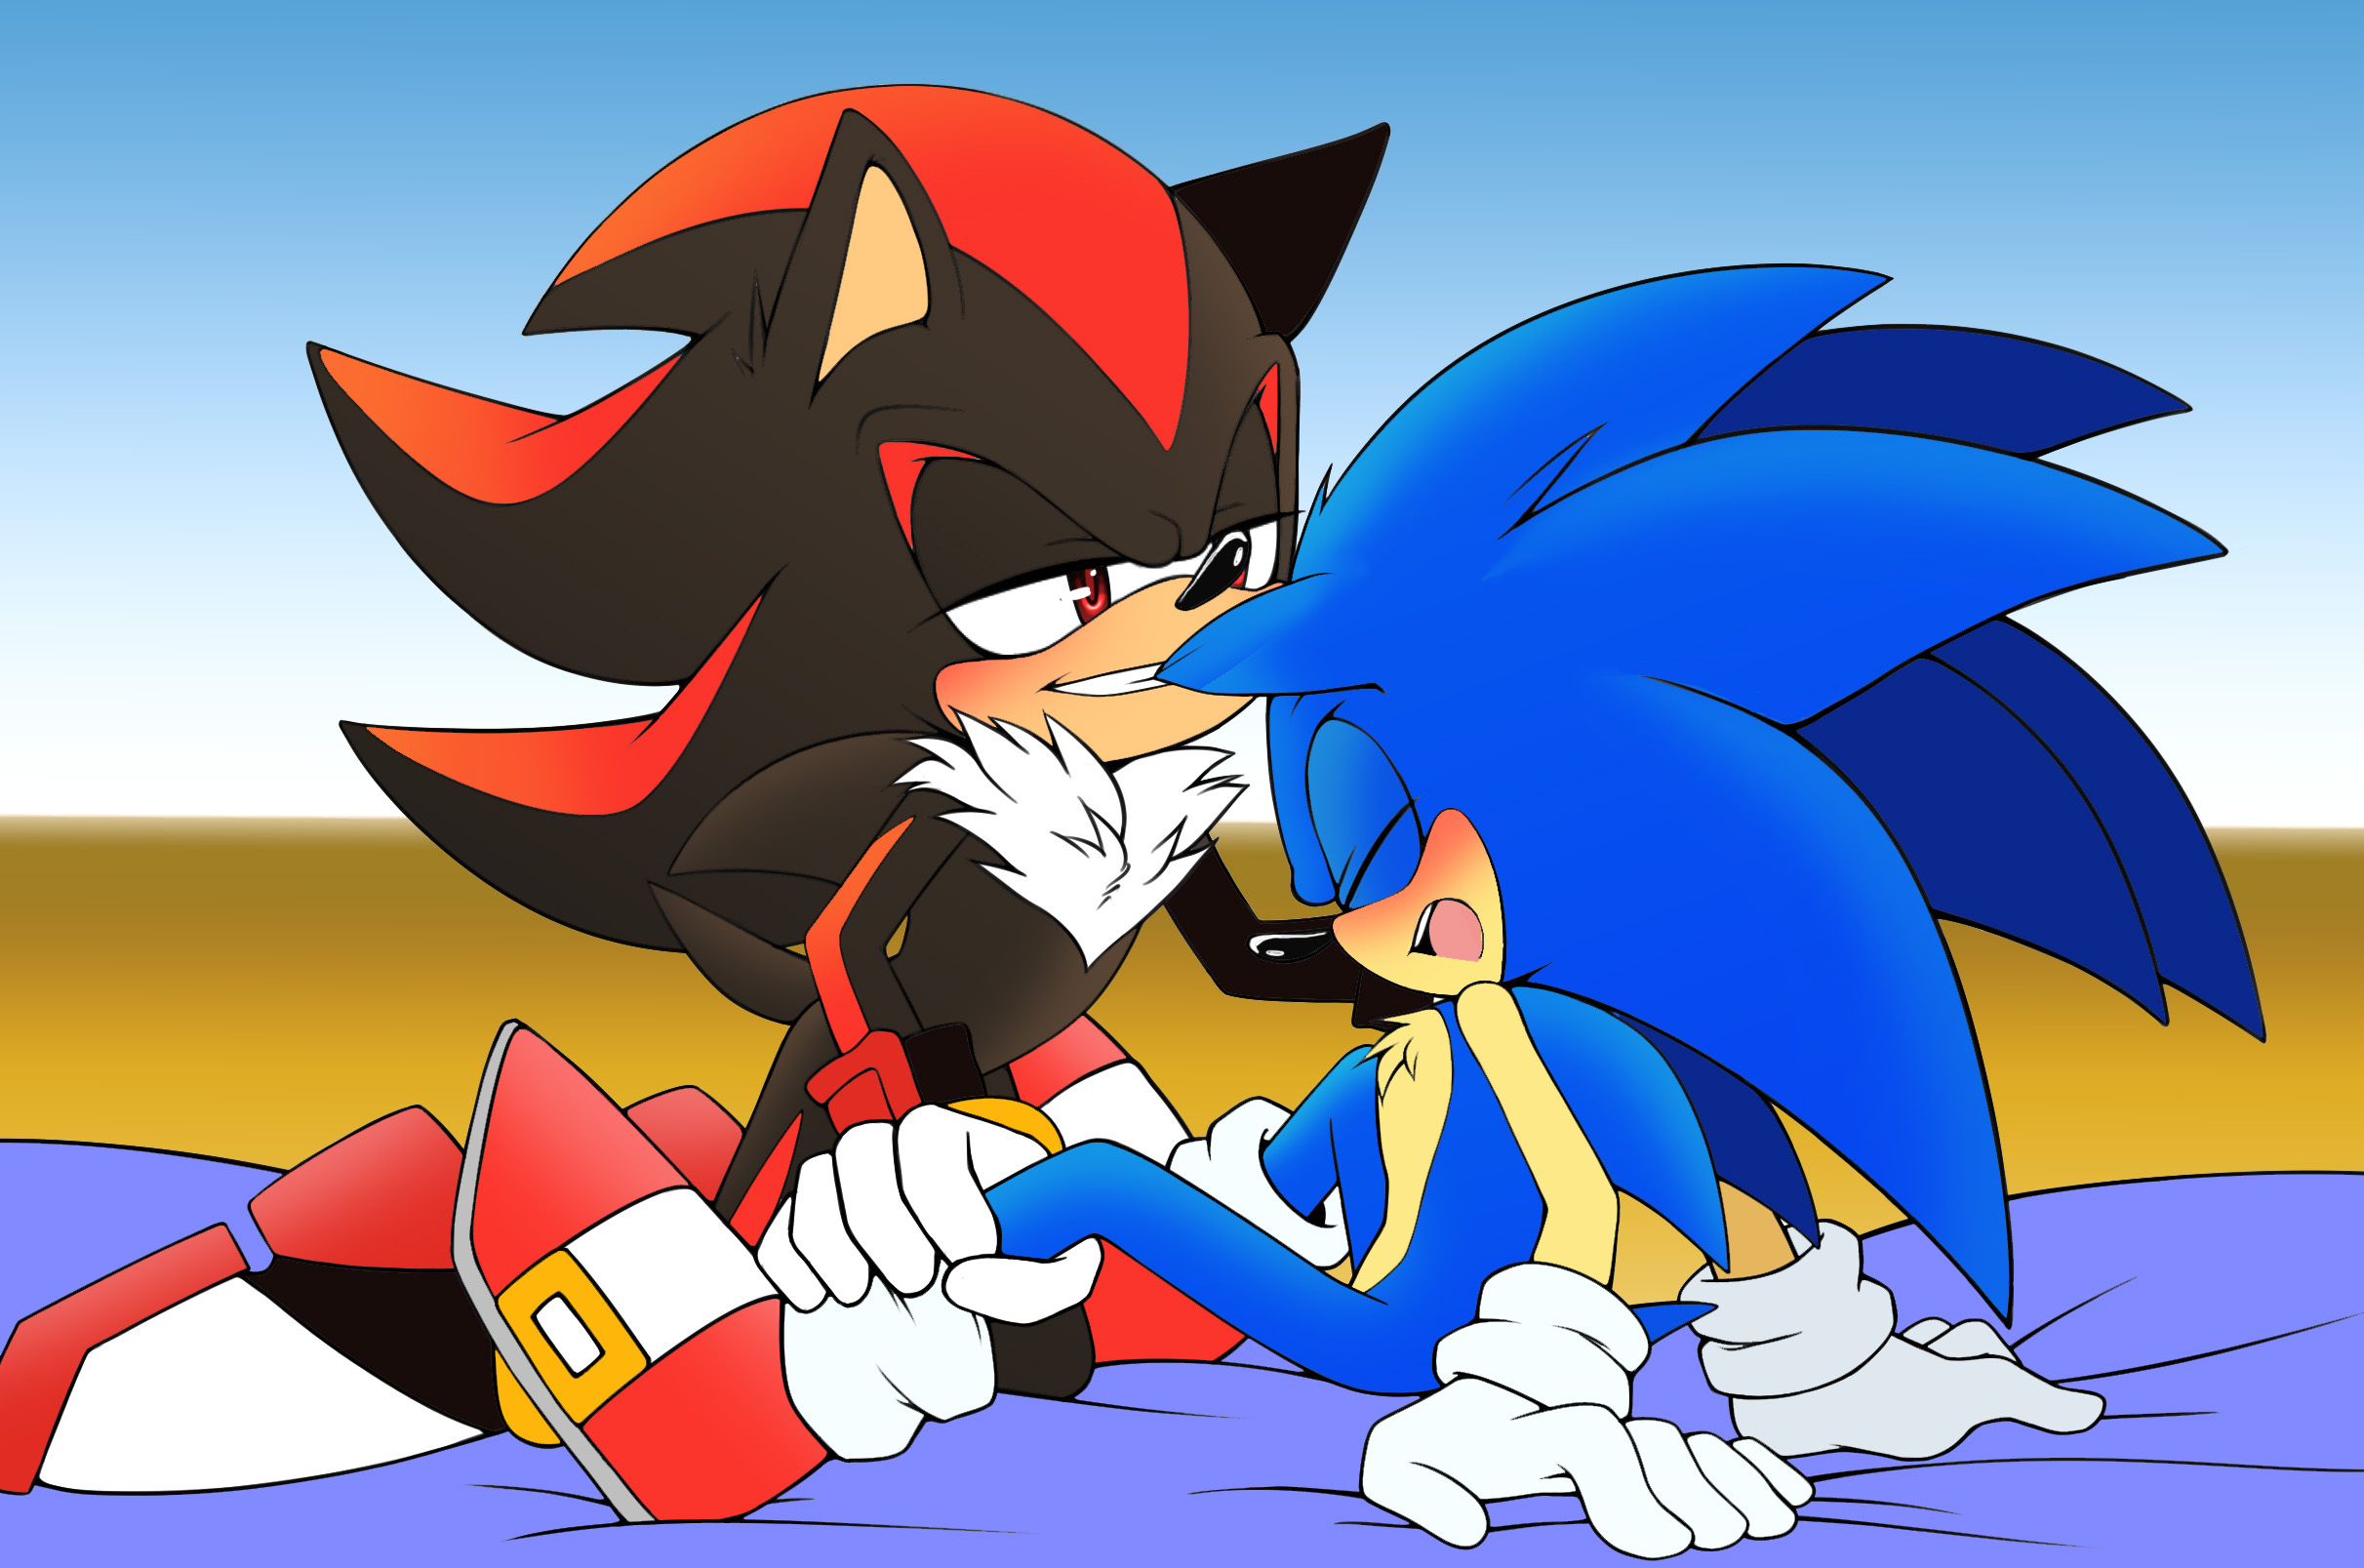 Sonadow Collab By AngelofHapiness.